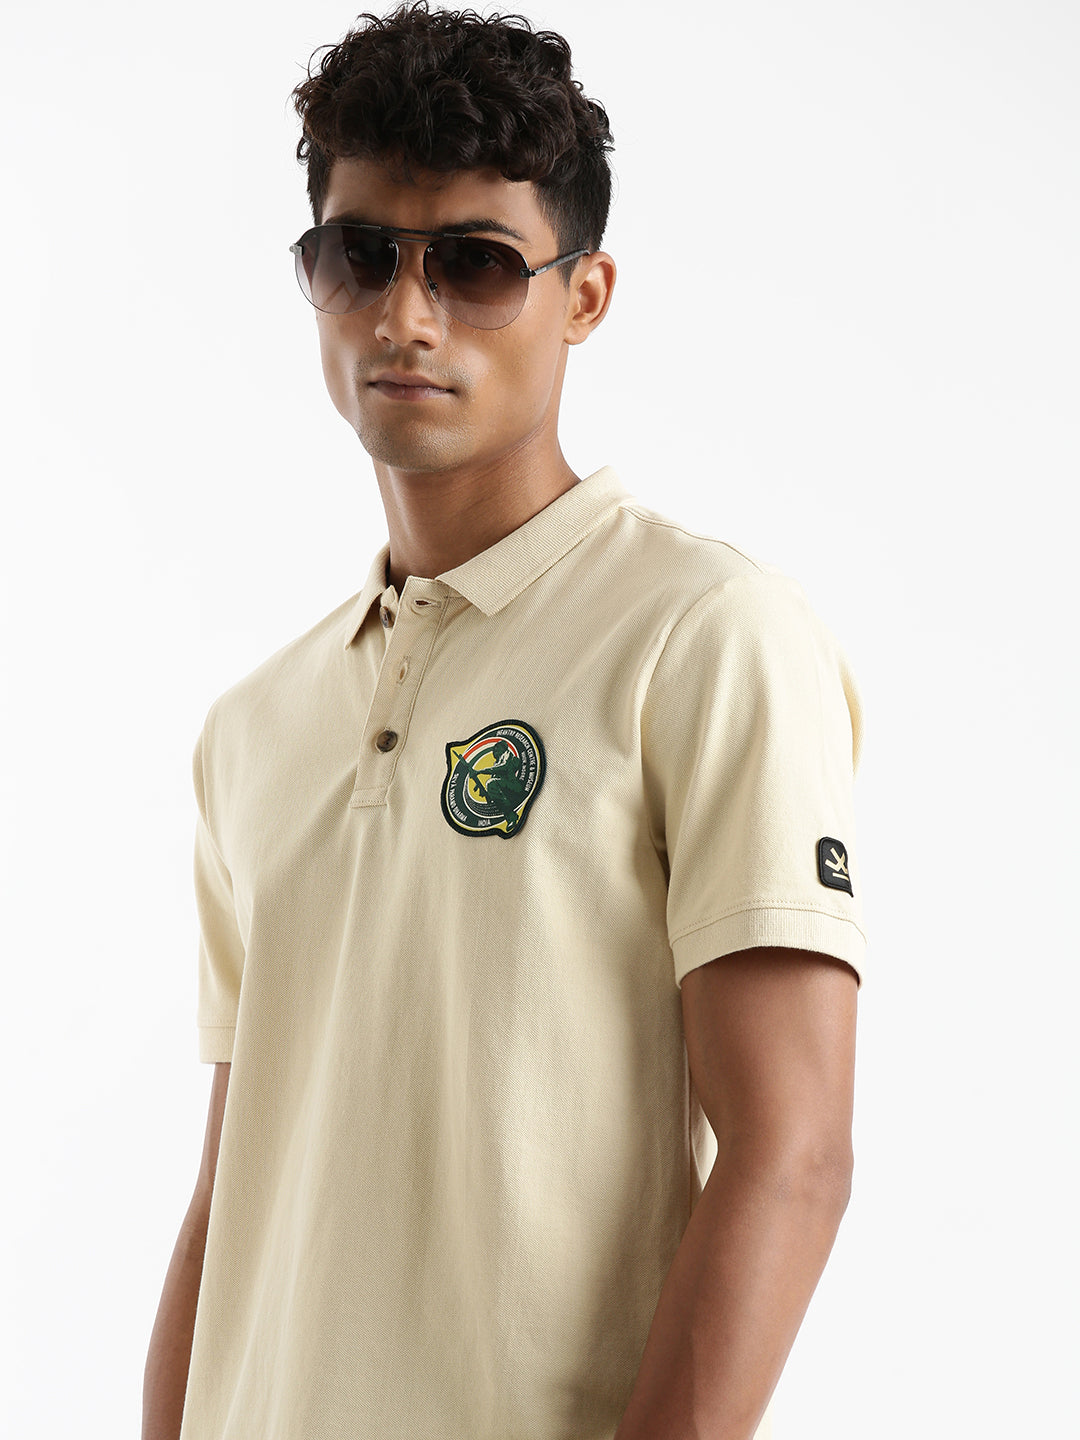 Indian Infantry By A47 Polo T-Shirt